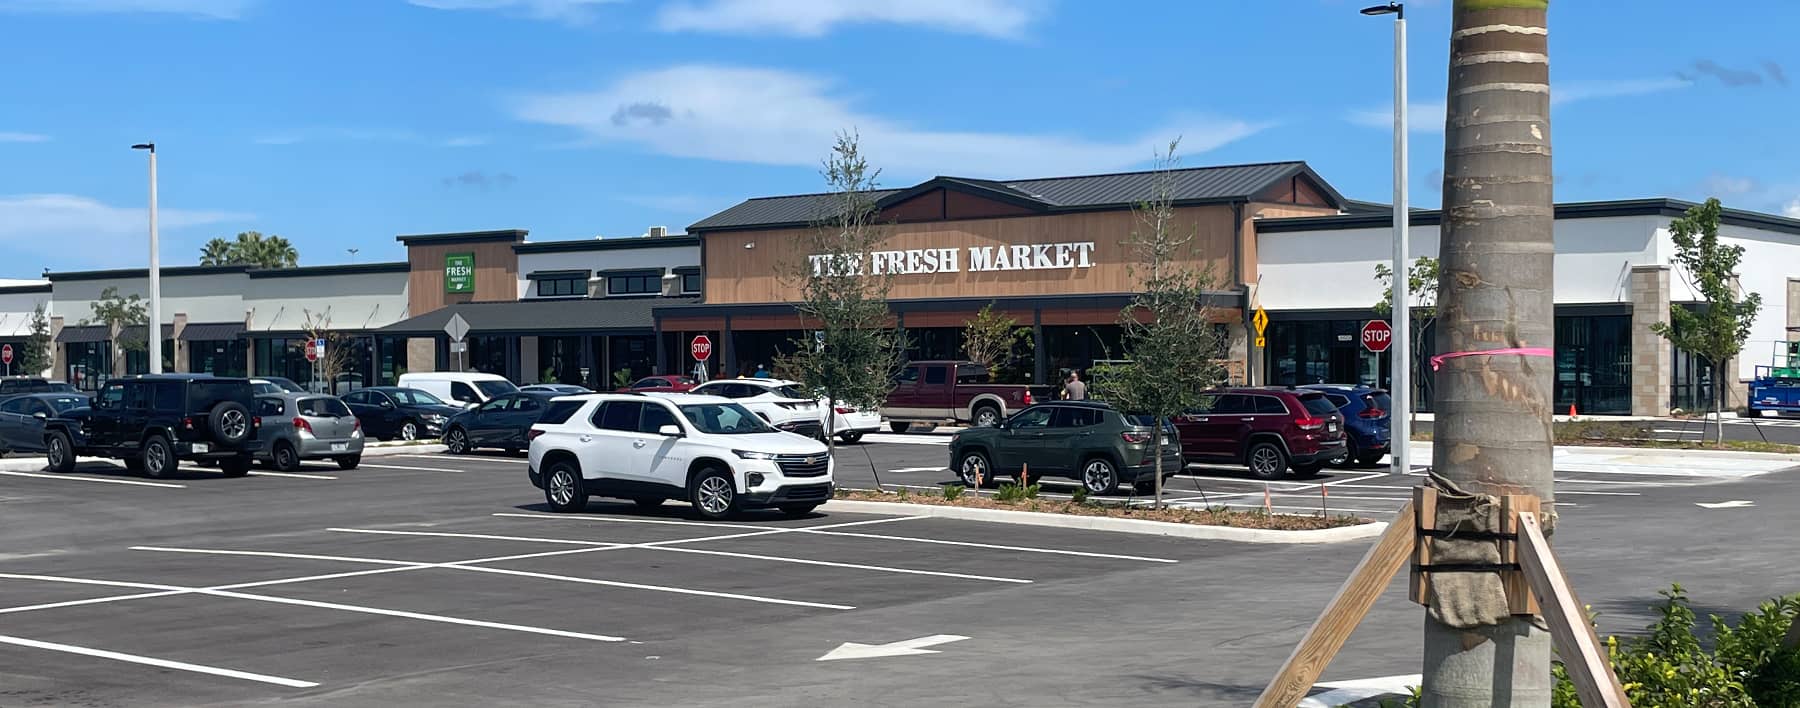 Ground Up Construction of The Fresh Market in Port St Lucie, Florida | GLR, Inc.